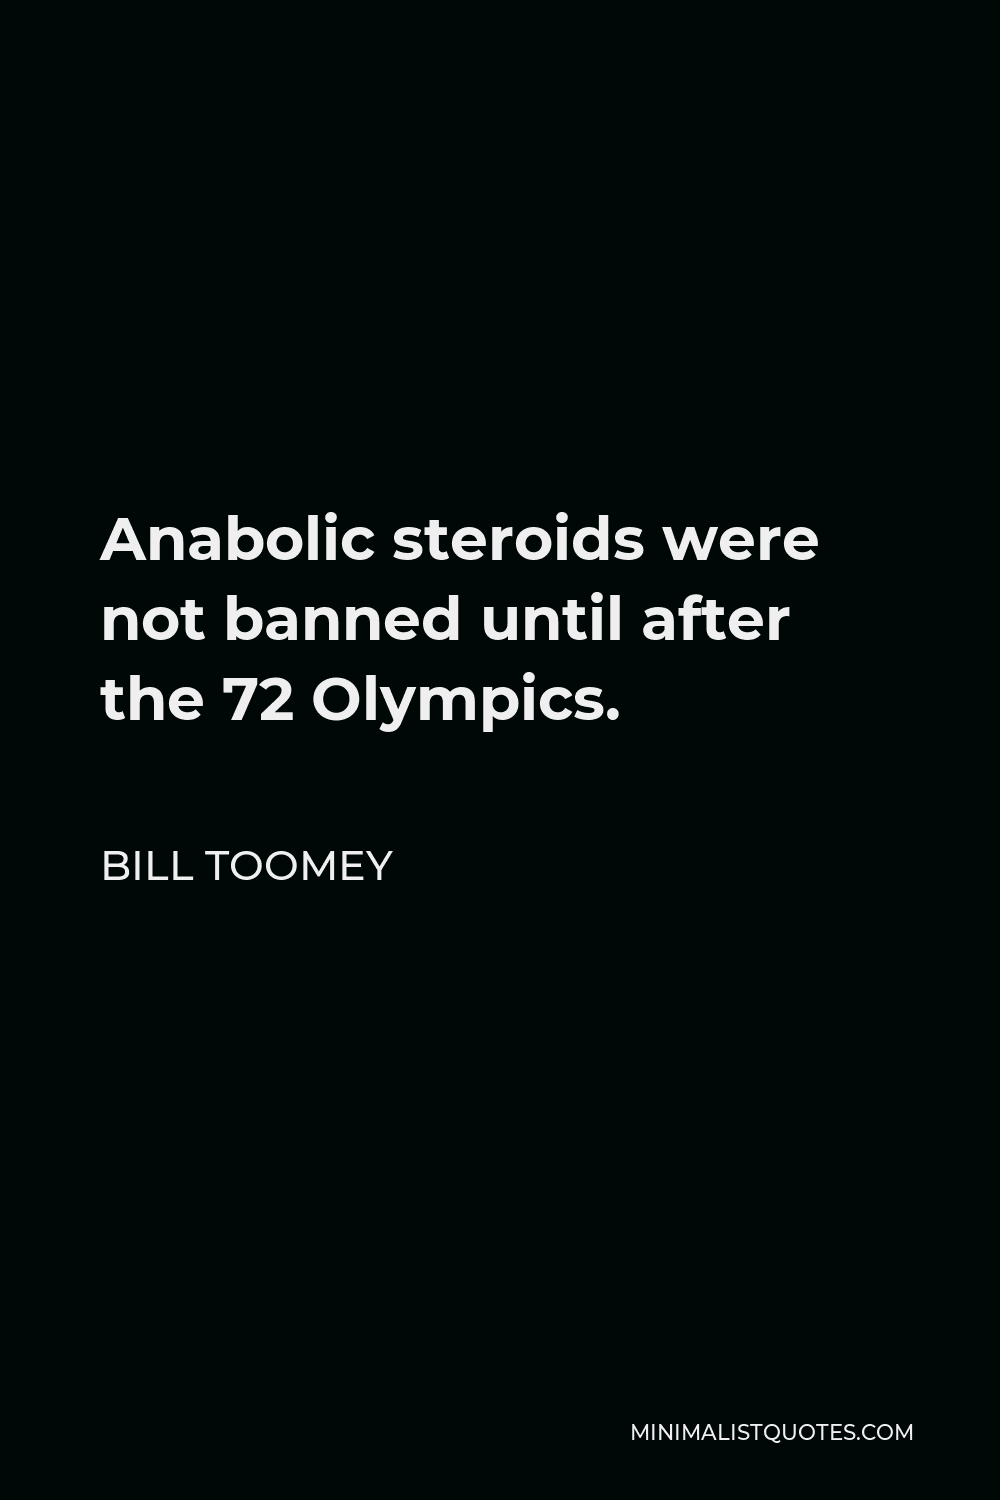 Bill Toomey Quote - Anabolic steroids were not banned until after the 72 Olympics.